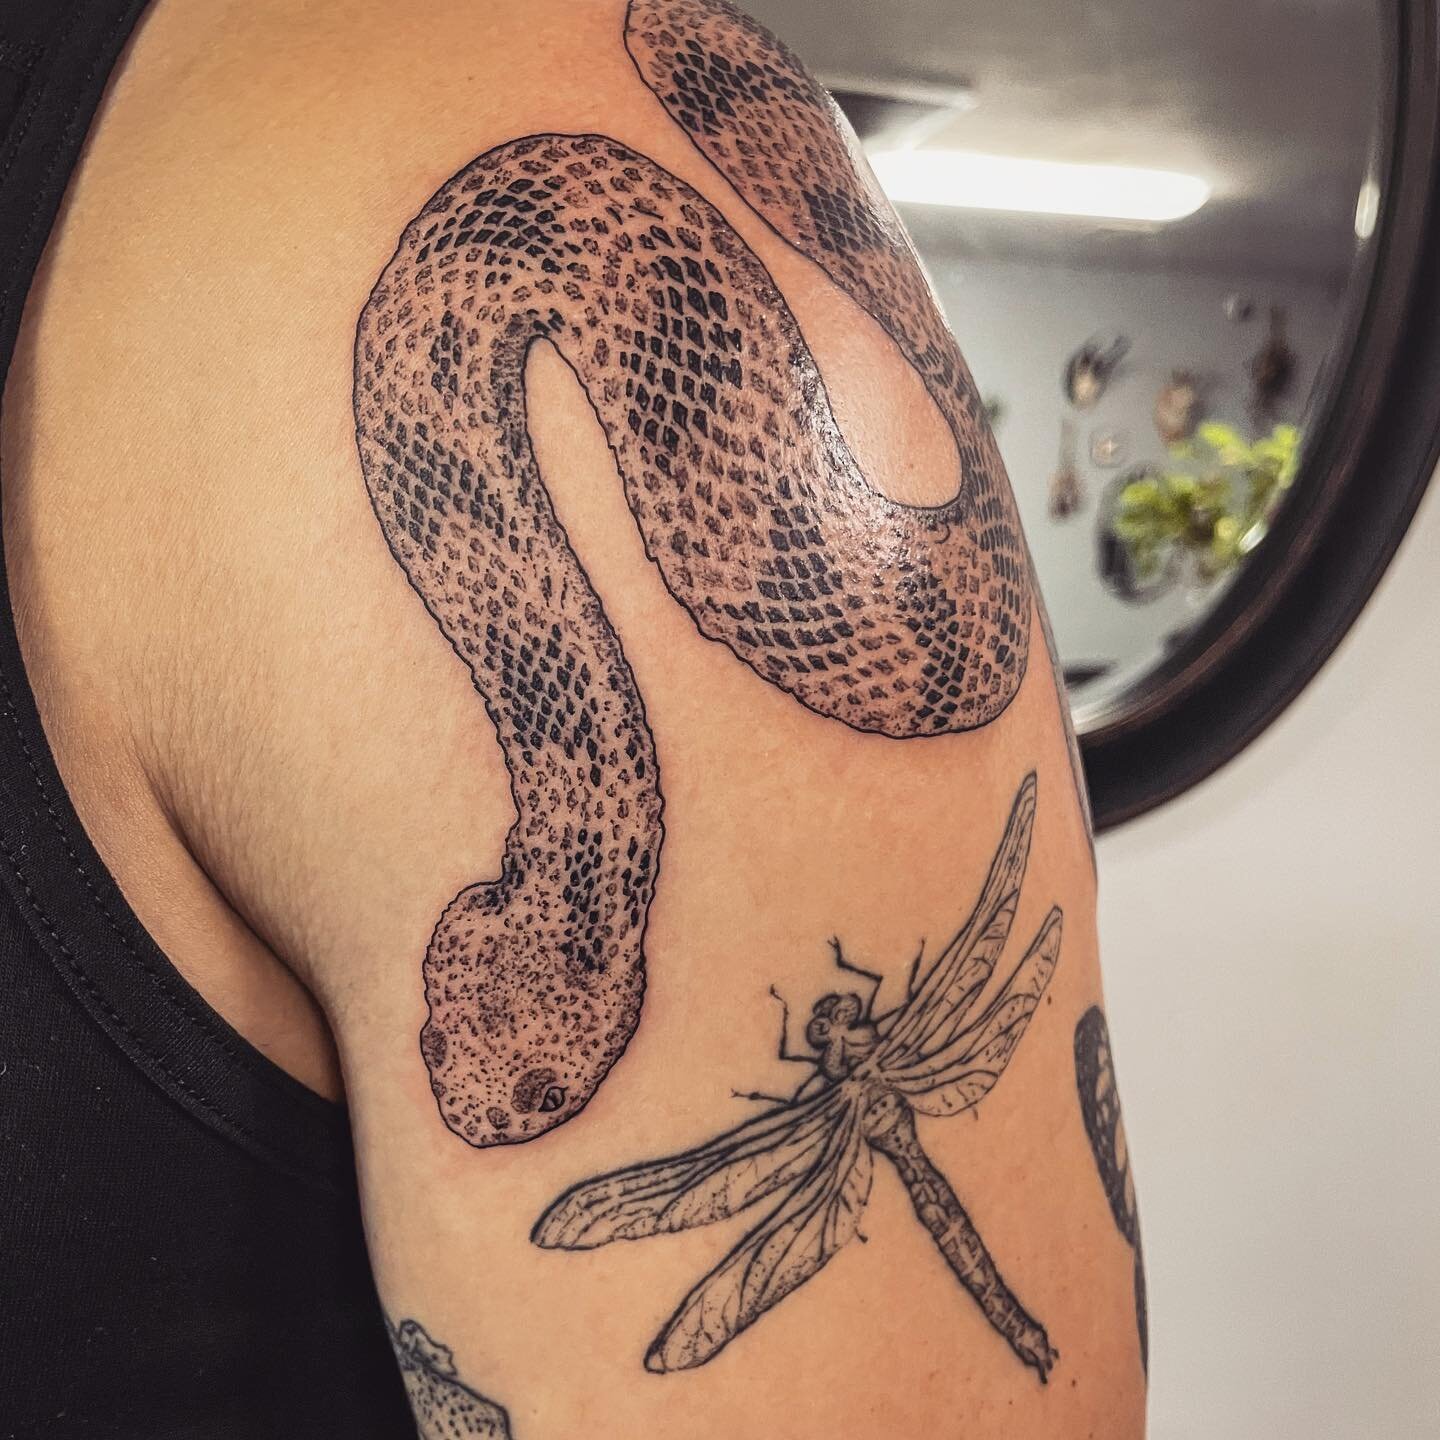 Rattle snakes make me think of the blazing sun&hellip; here&rsquo;s one for Joe ☀️ 
&bull;
&bull;
&bull;
#timberrattlesnake #rattlesnaketattoo #blackworknow #shouldertattoo #tttism